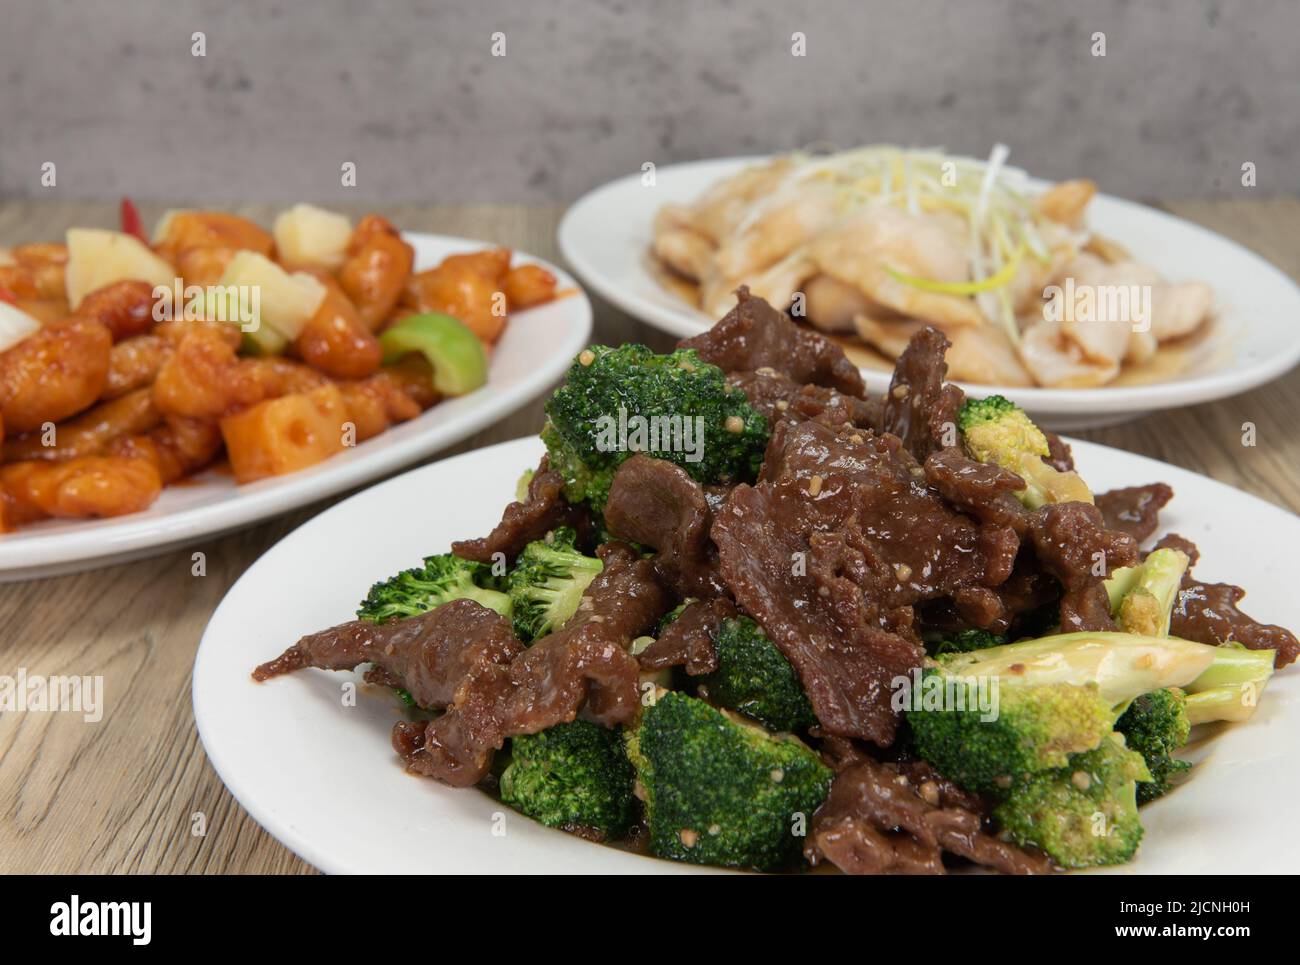 Temping choices of meals with the beef and broccoli featured, for a great Chinese food meal. Stock Photo